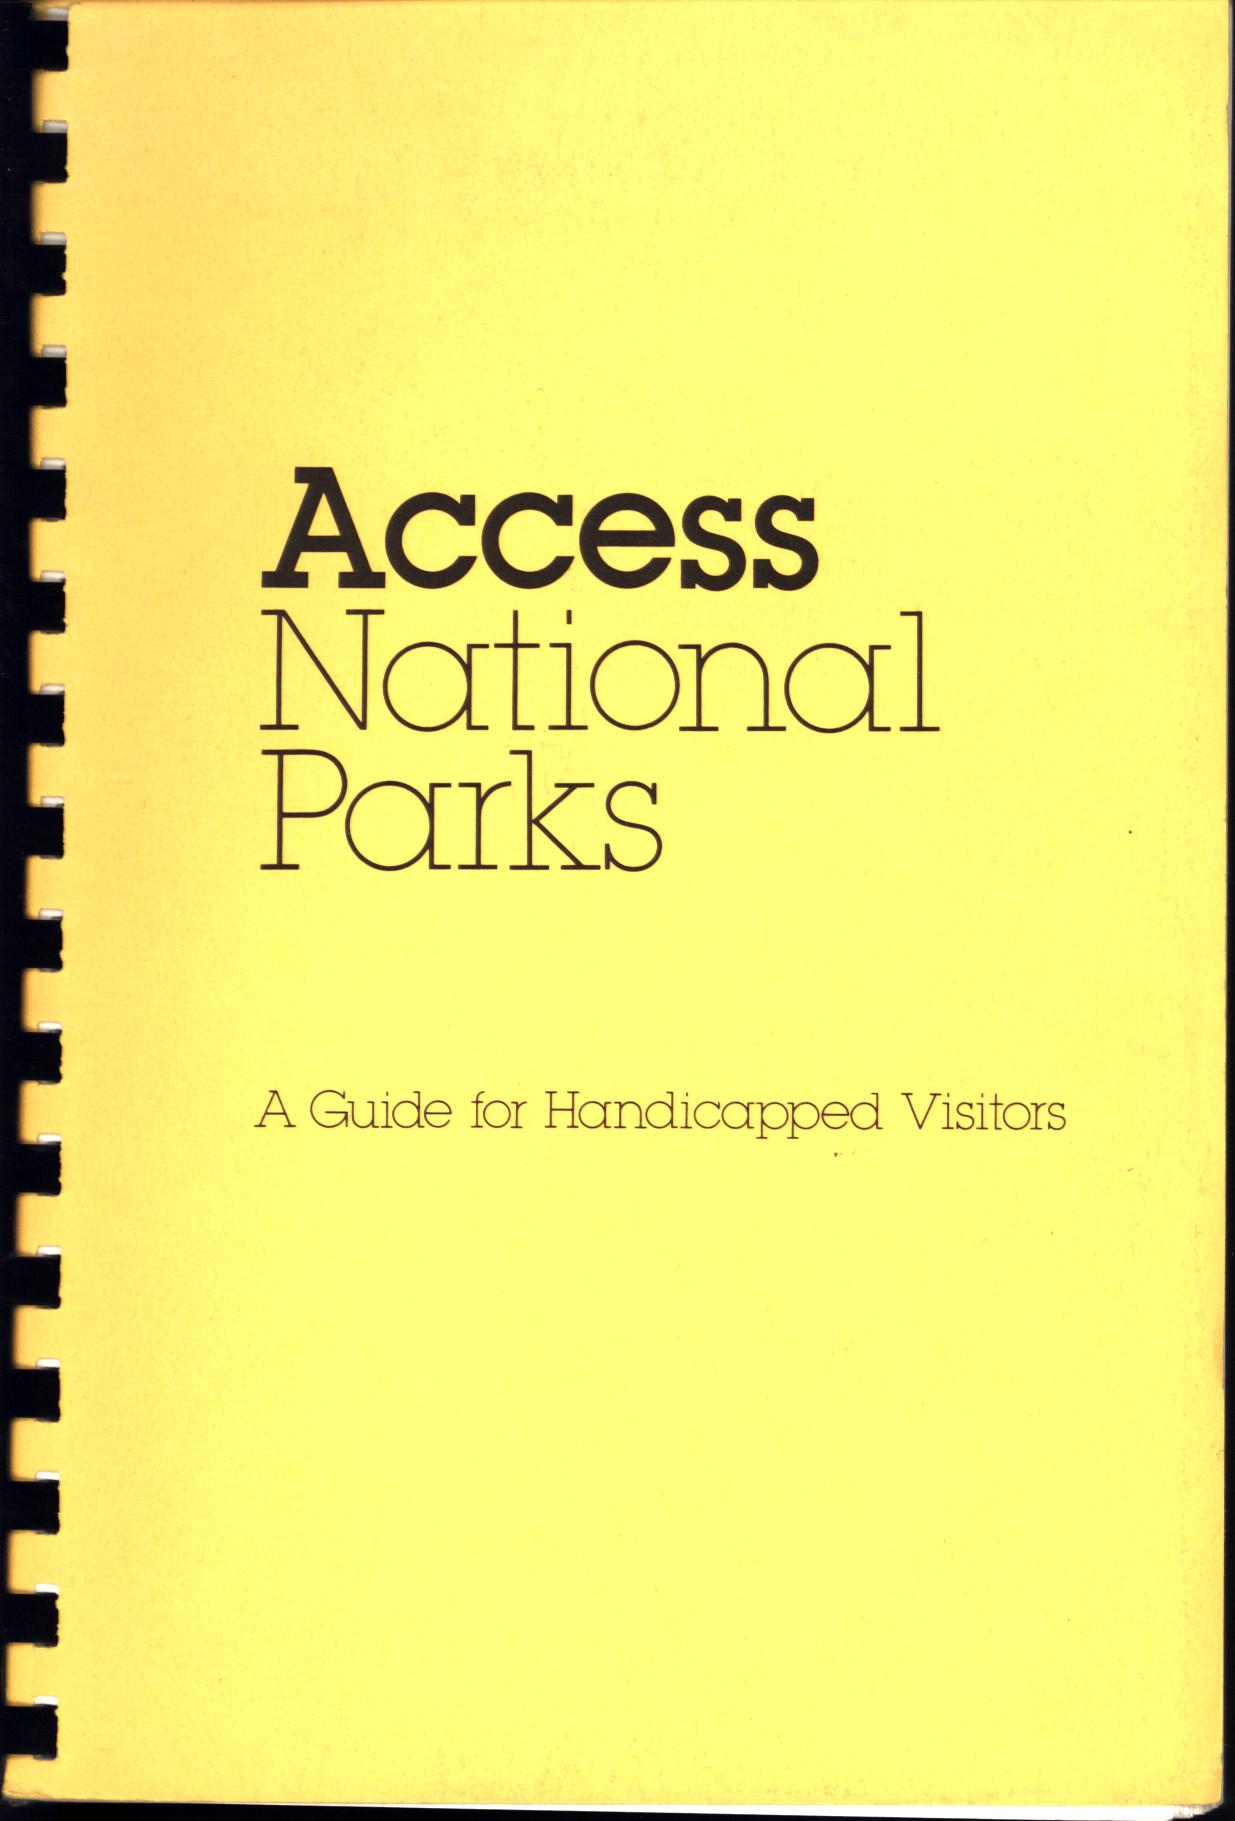 ACCESS NATIONAL PARKS: a guide for handicapped visitors.